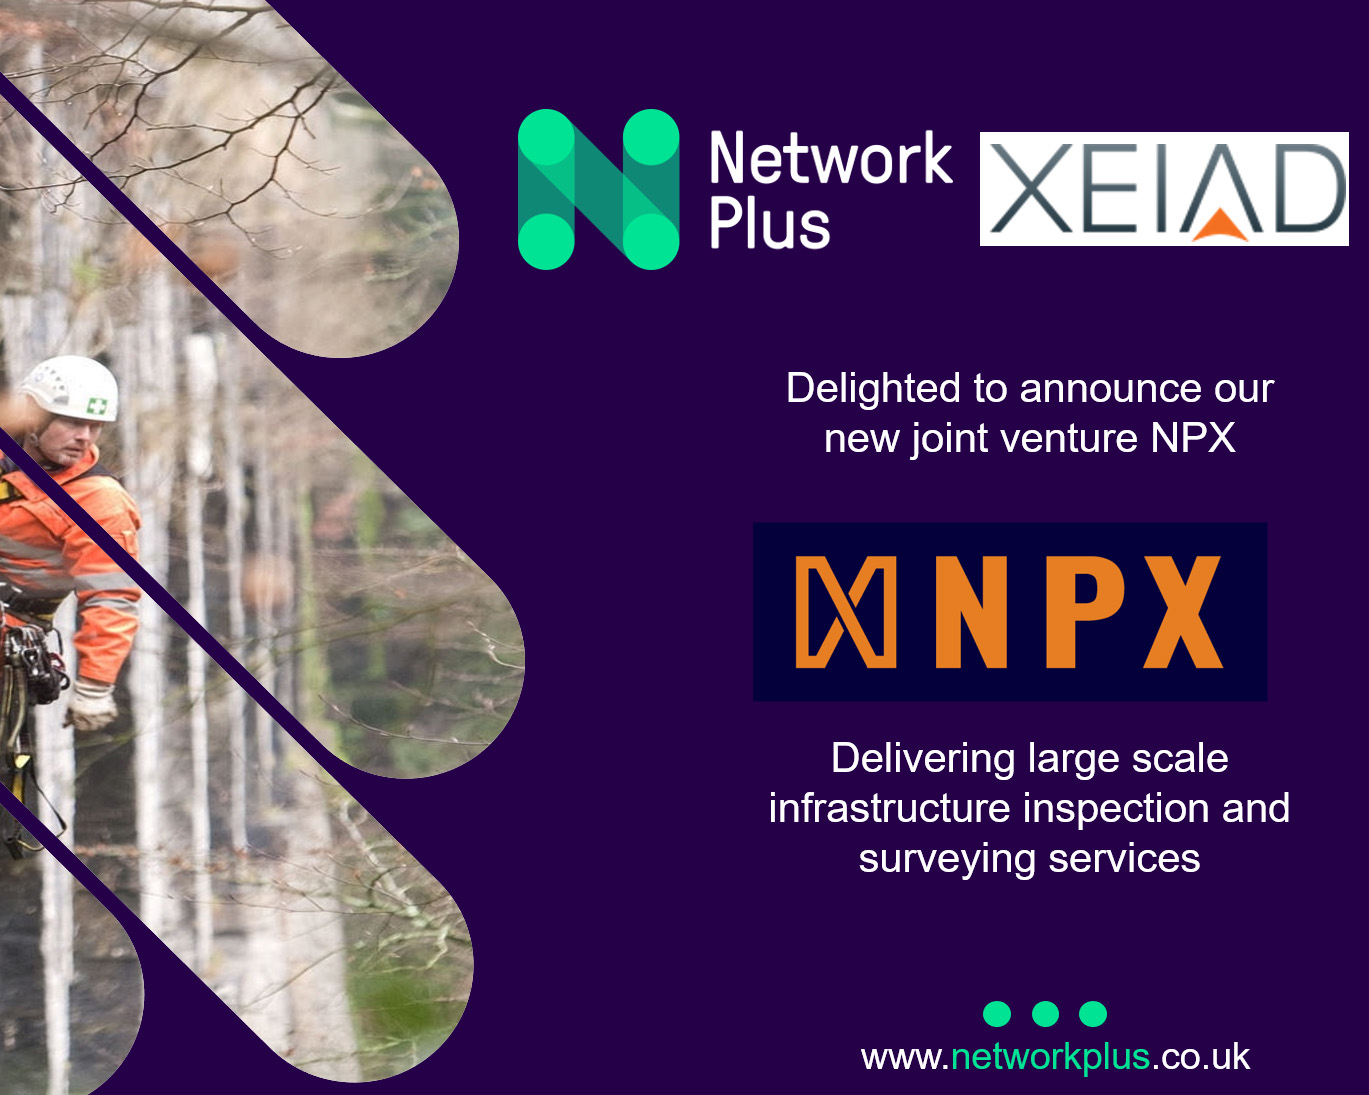 Network Plus and XEIAD join forces to offer large scale infrastructure inspection and surveying services